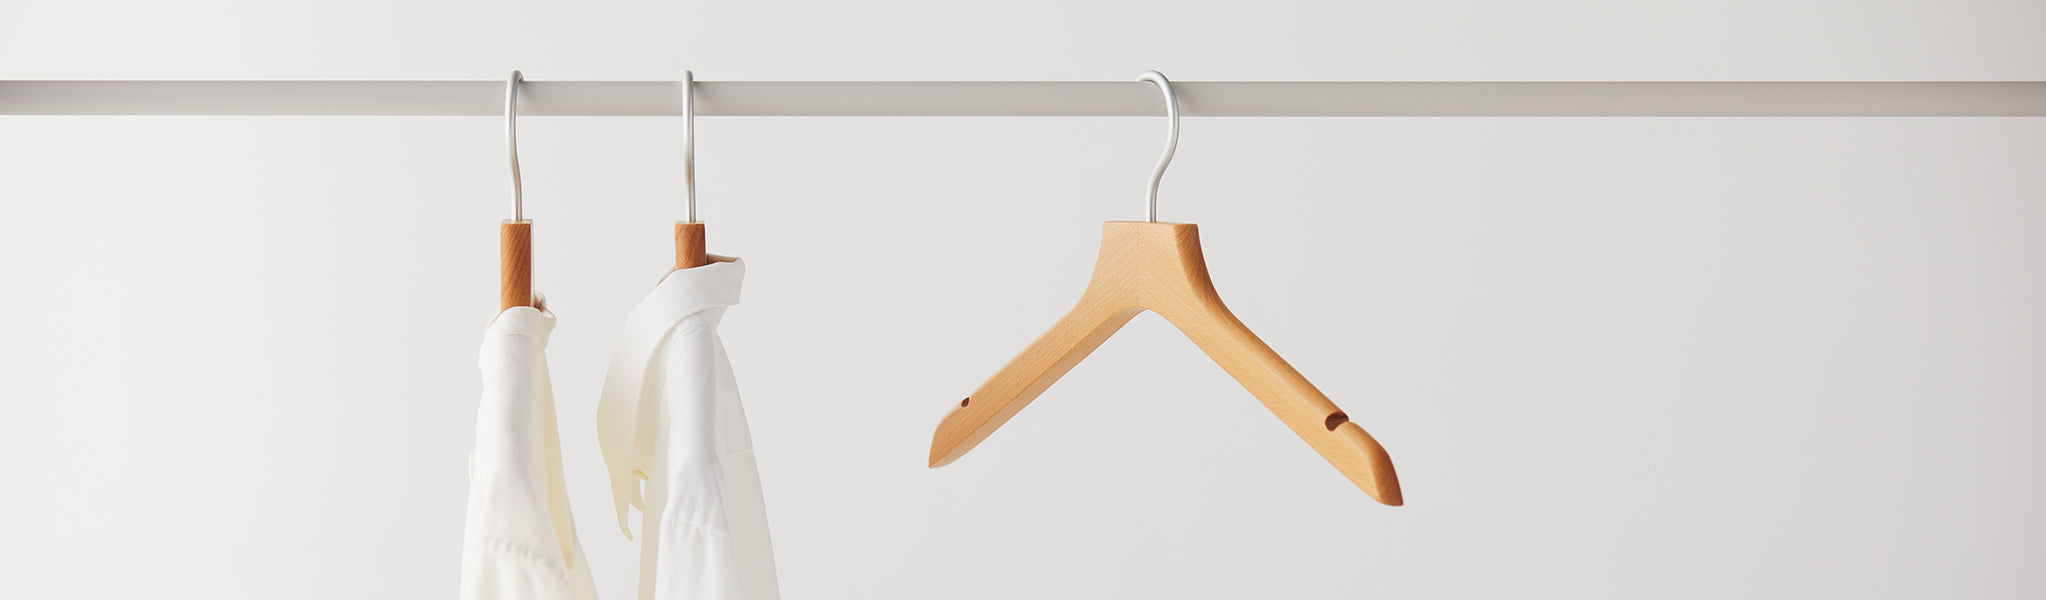 Hooks & Hangers Banner-3 wooden hangers with 2 in use 